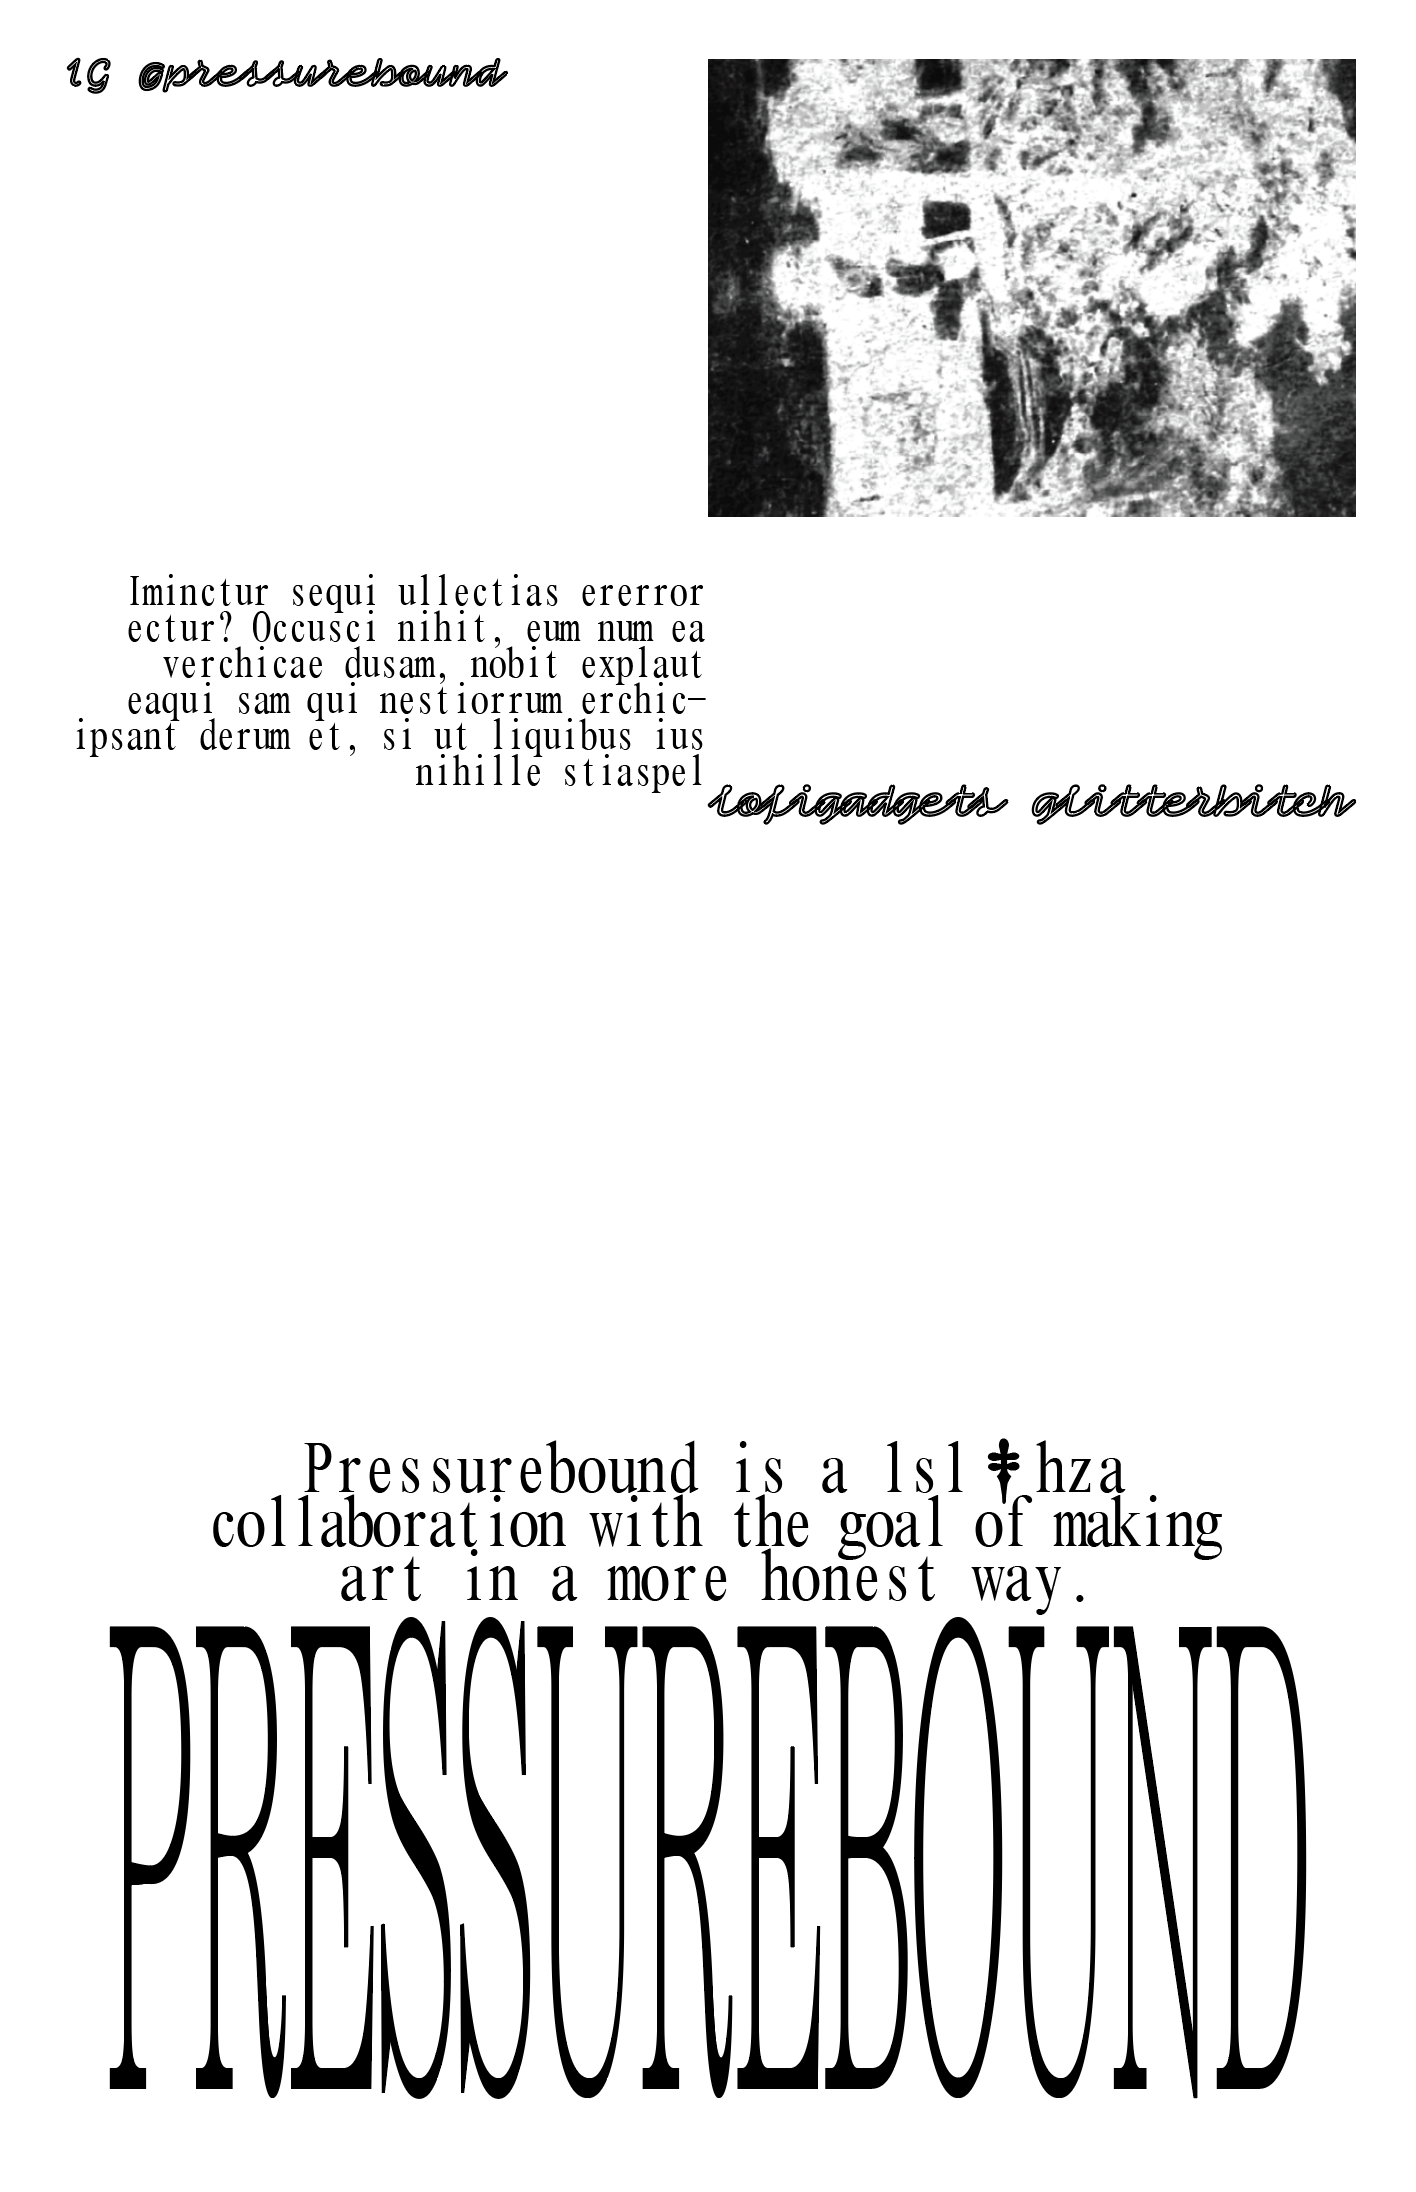 Screenshot of a draft of a poster, in black text/images on a white background. 'PRESSUREBOUND' stretched tall and narrow, with the text 'Pressurebound is a lsl & hza collaboration with the goal of making art in a more honest way.' (A dagger stands in for the & symbol.) sitting above it. There is an image and three other pieces of text anchored at the top of the composition.